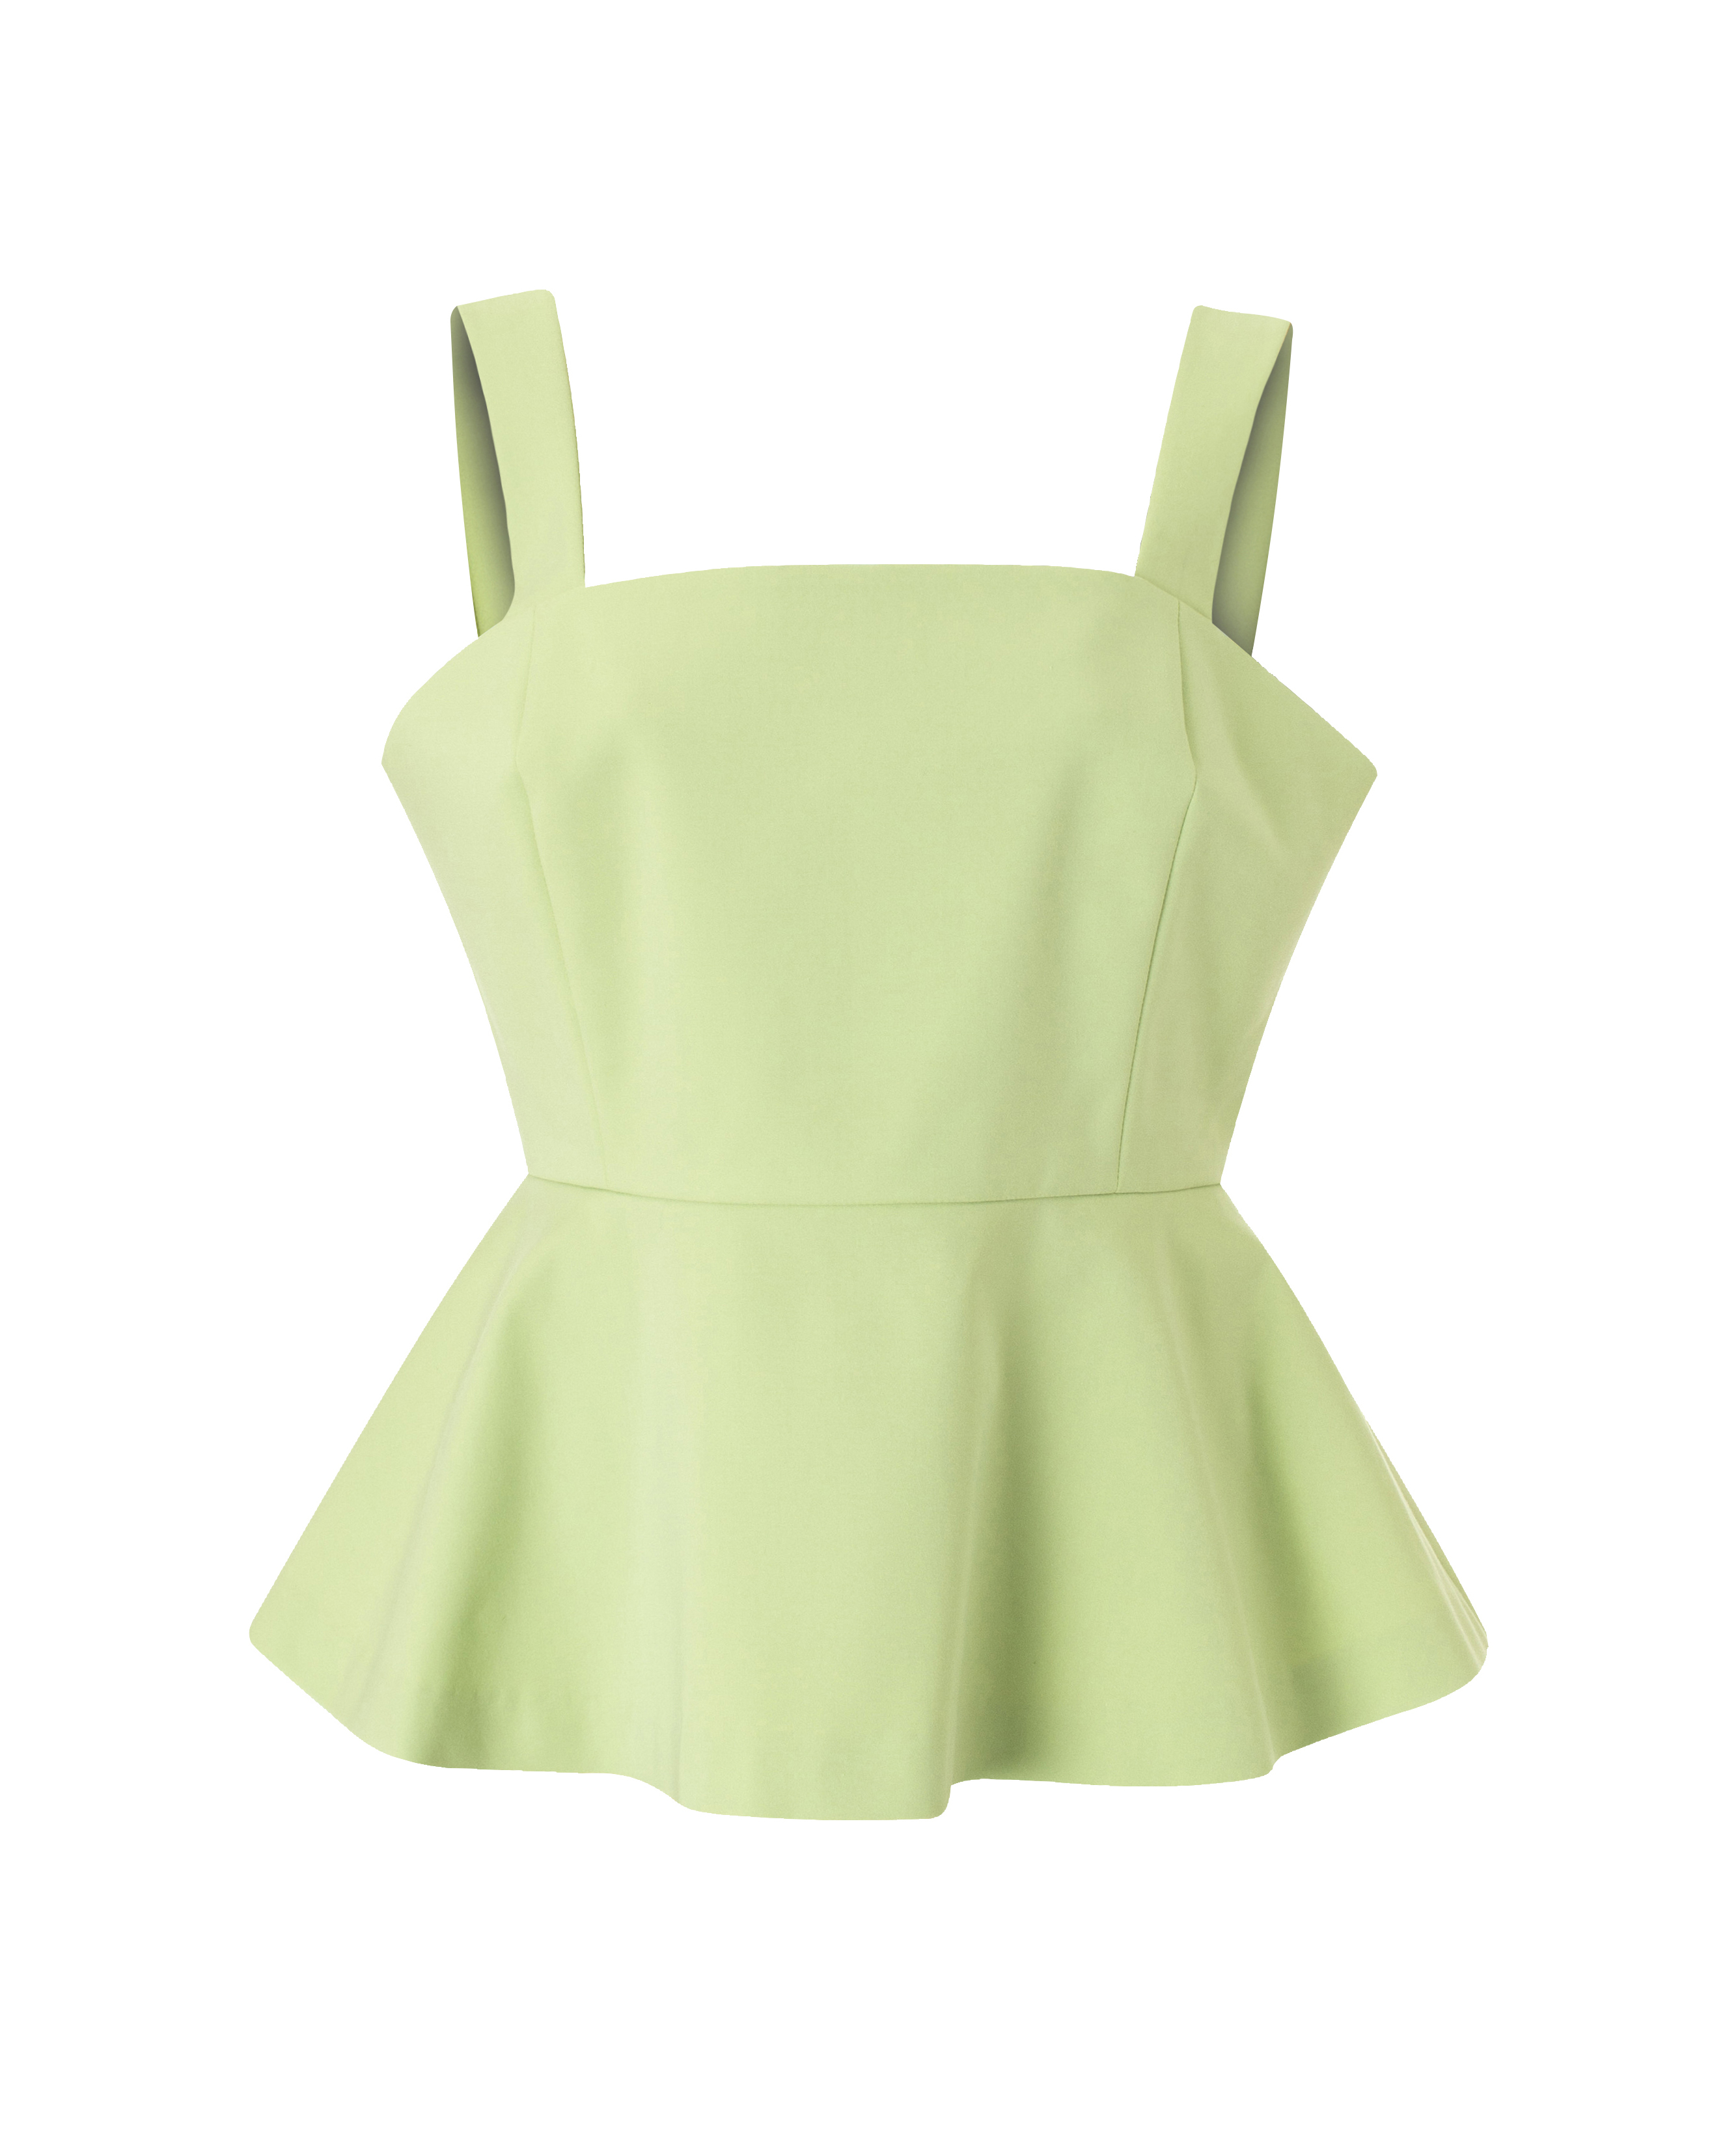 flared sleeveless top_lime